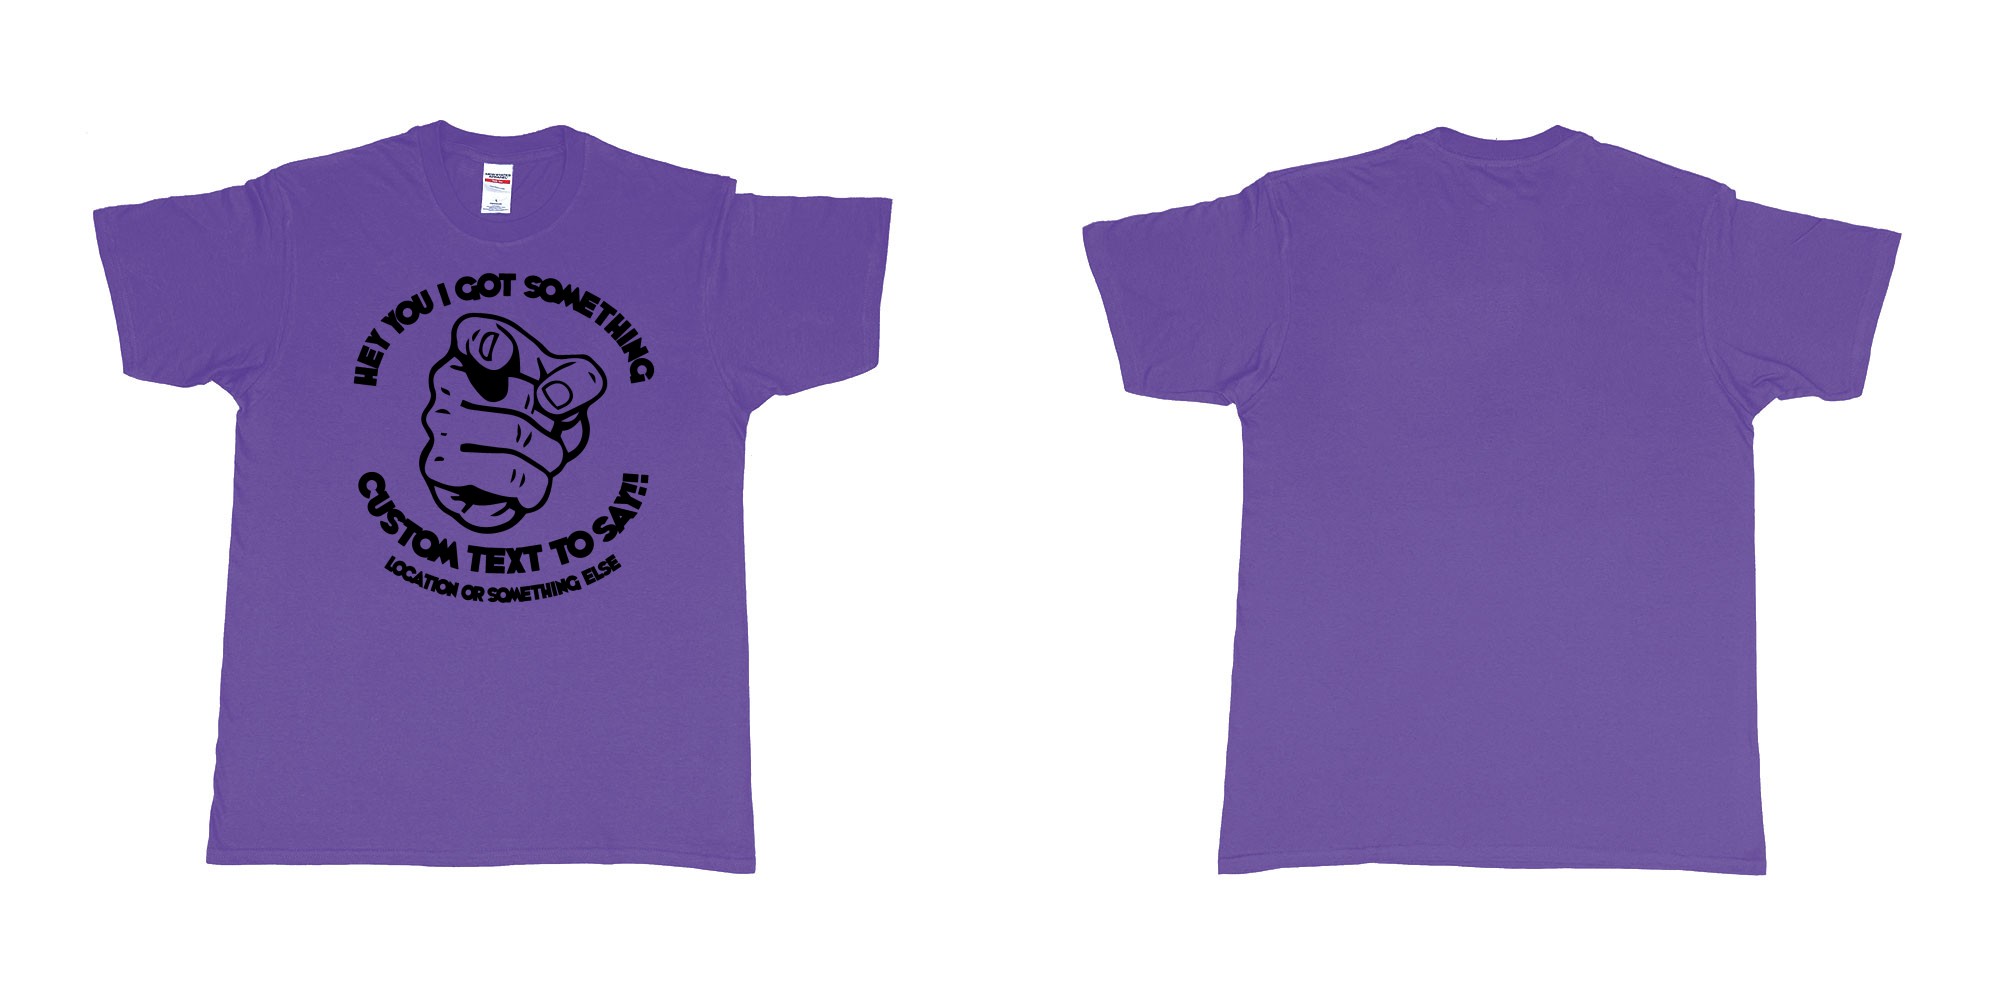 Custom tshirt design finger pointing at you with custom text to say in fabric color purple choice your own text made in Bali by The Pirate Way